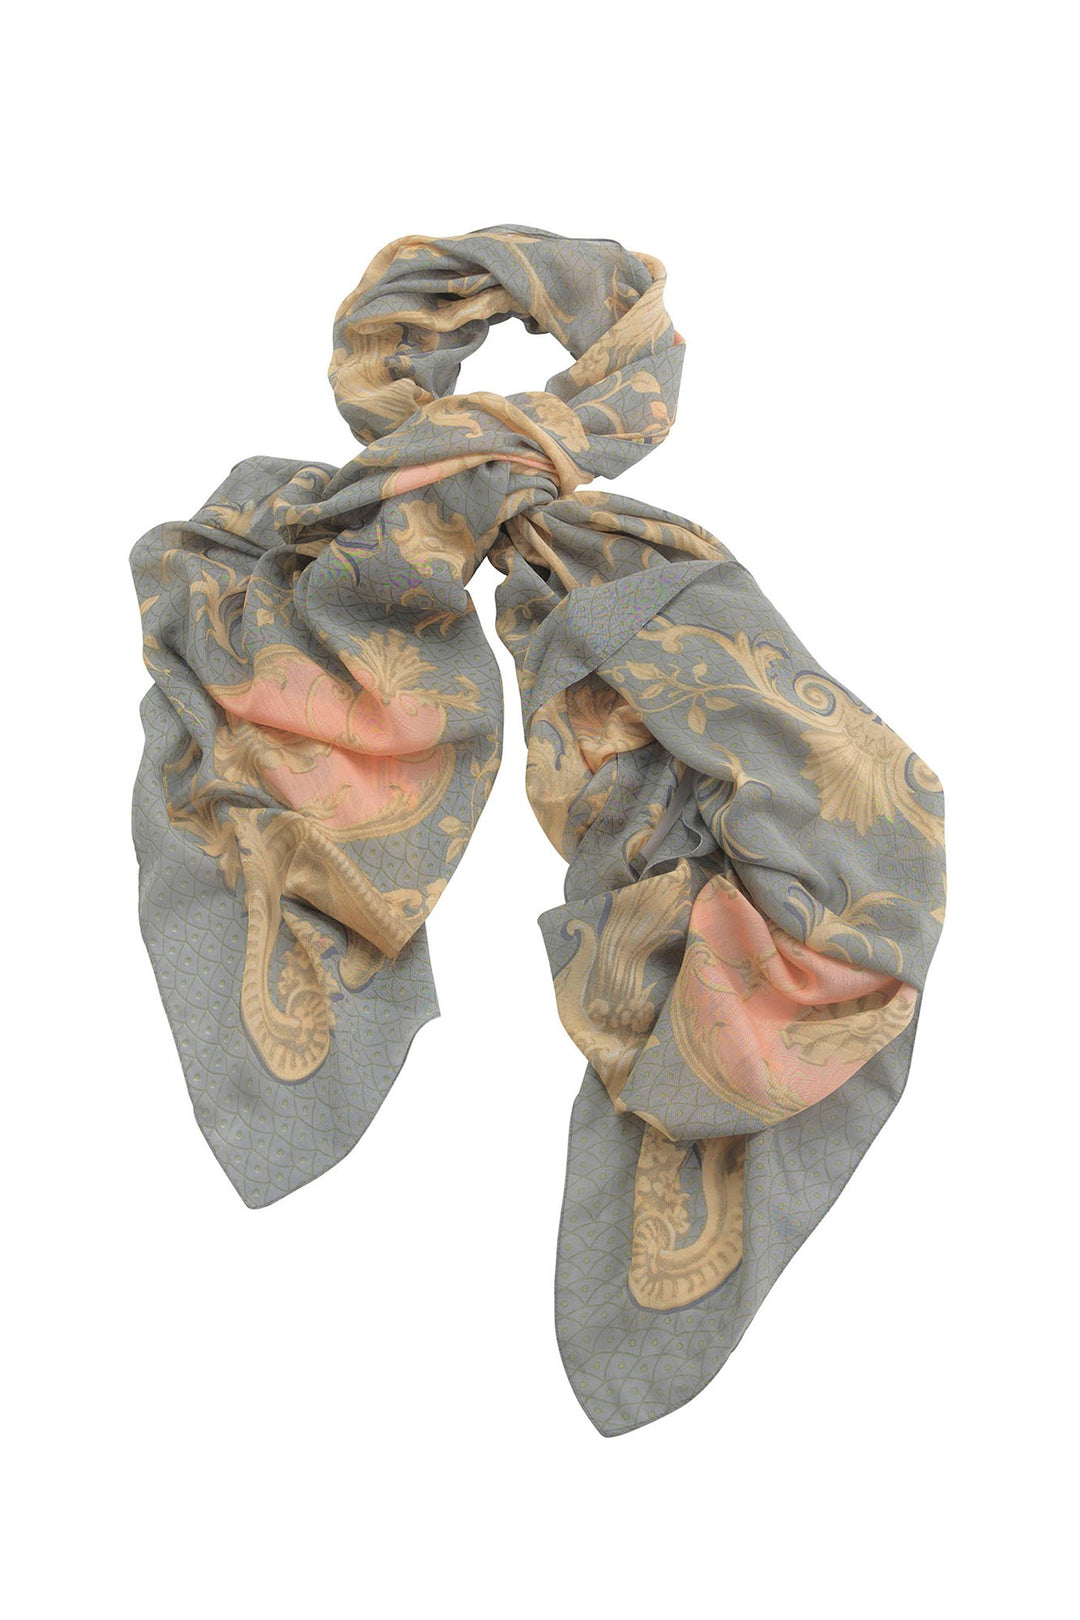 One Hundred Stars Rococo Grey Scarf- Our scarves are a full 100cm x 200cm making them perfect for layering in the winter months or worn as a delicate cover up during the summer seasons. 